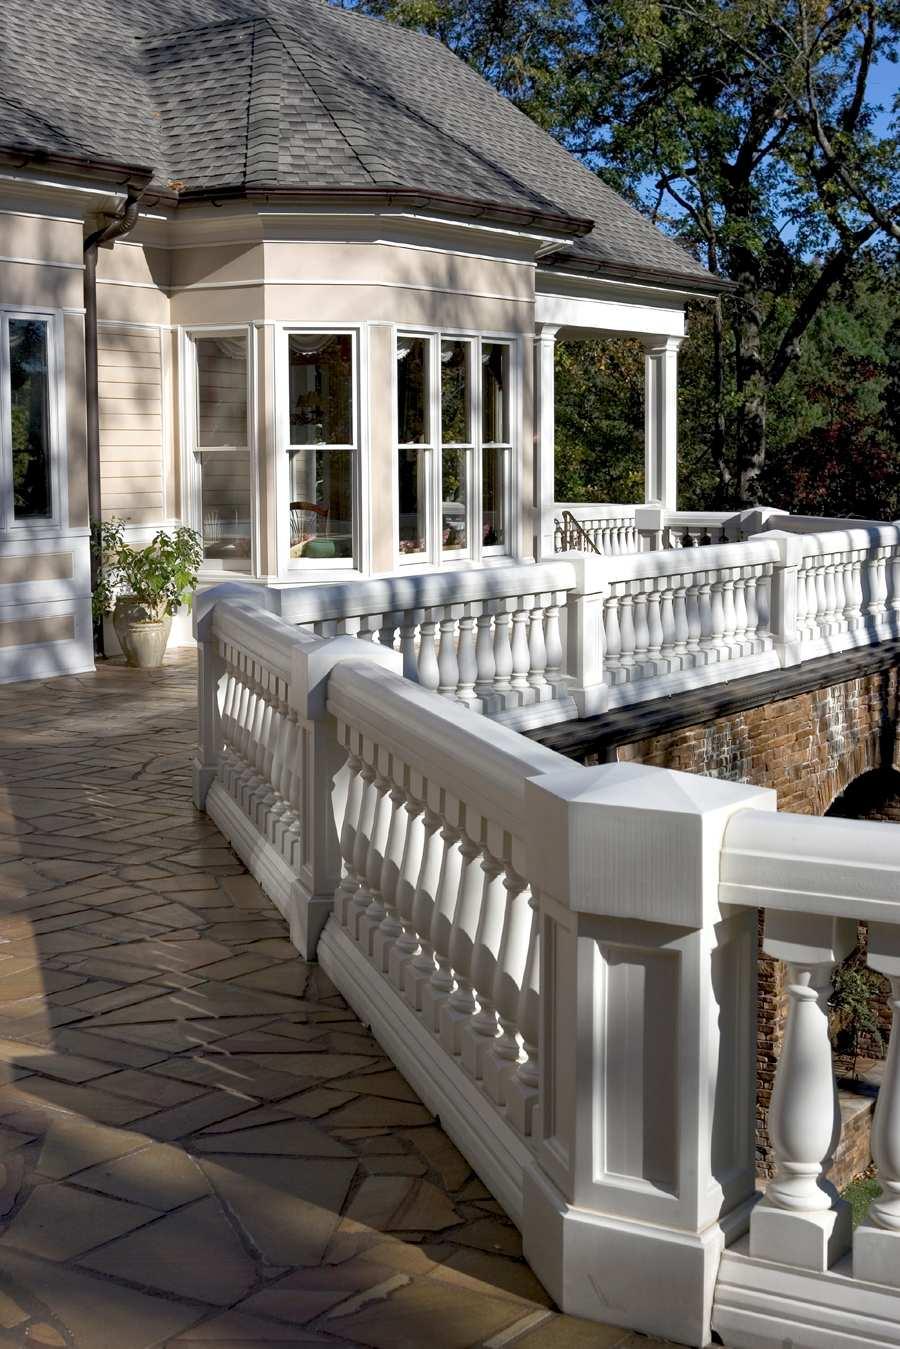 stairways and more. Each balustrade system piece is hand crafted and hand sanded to a beautiful smooth finish, with no visible seams.